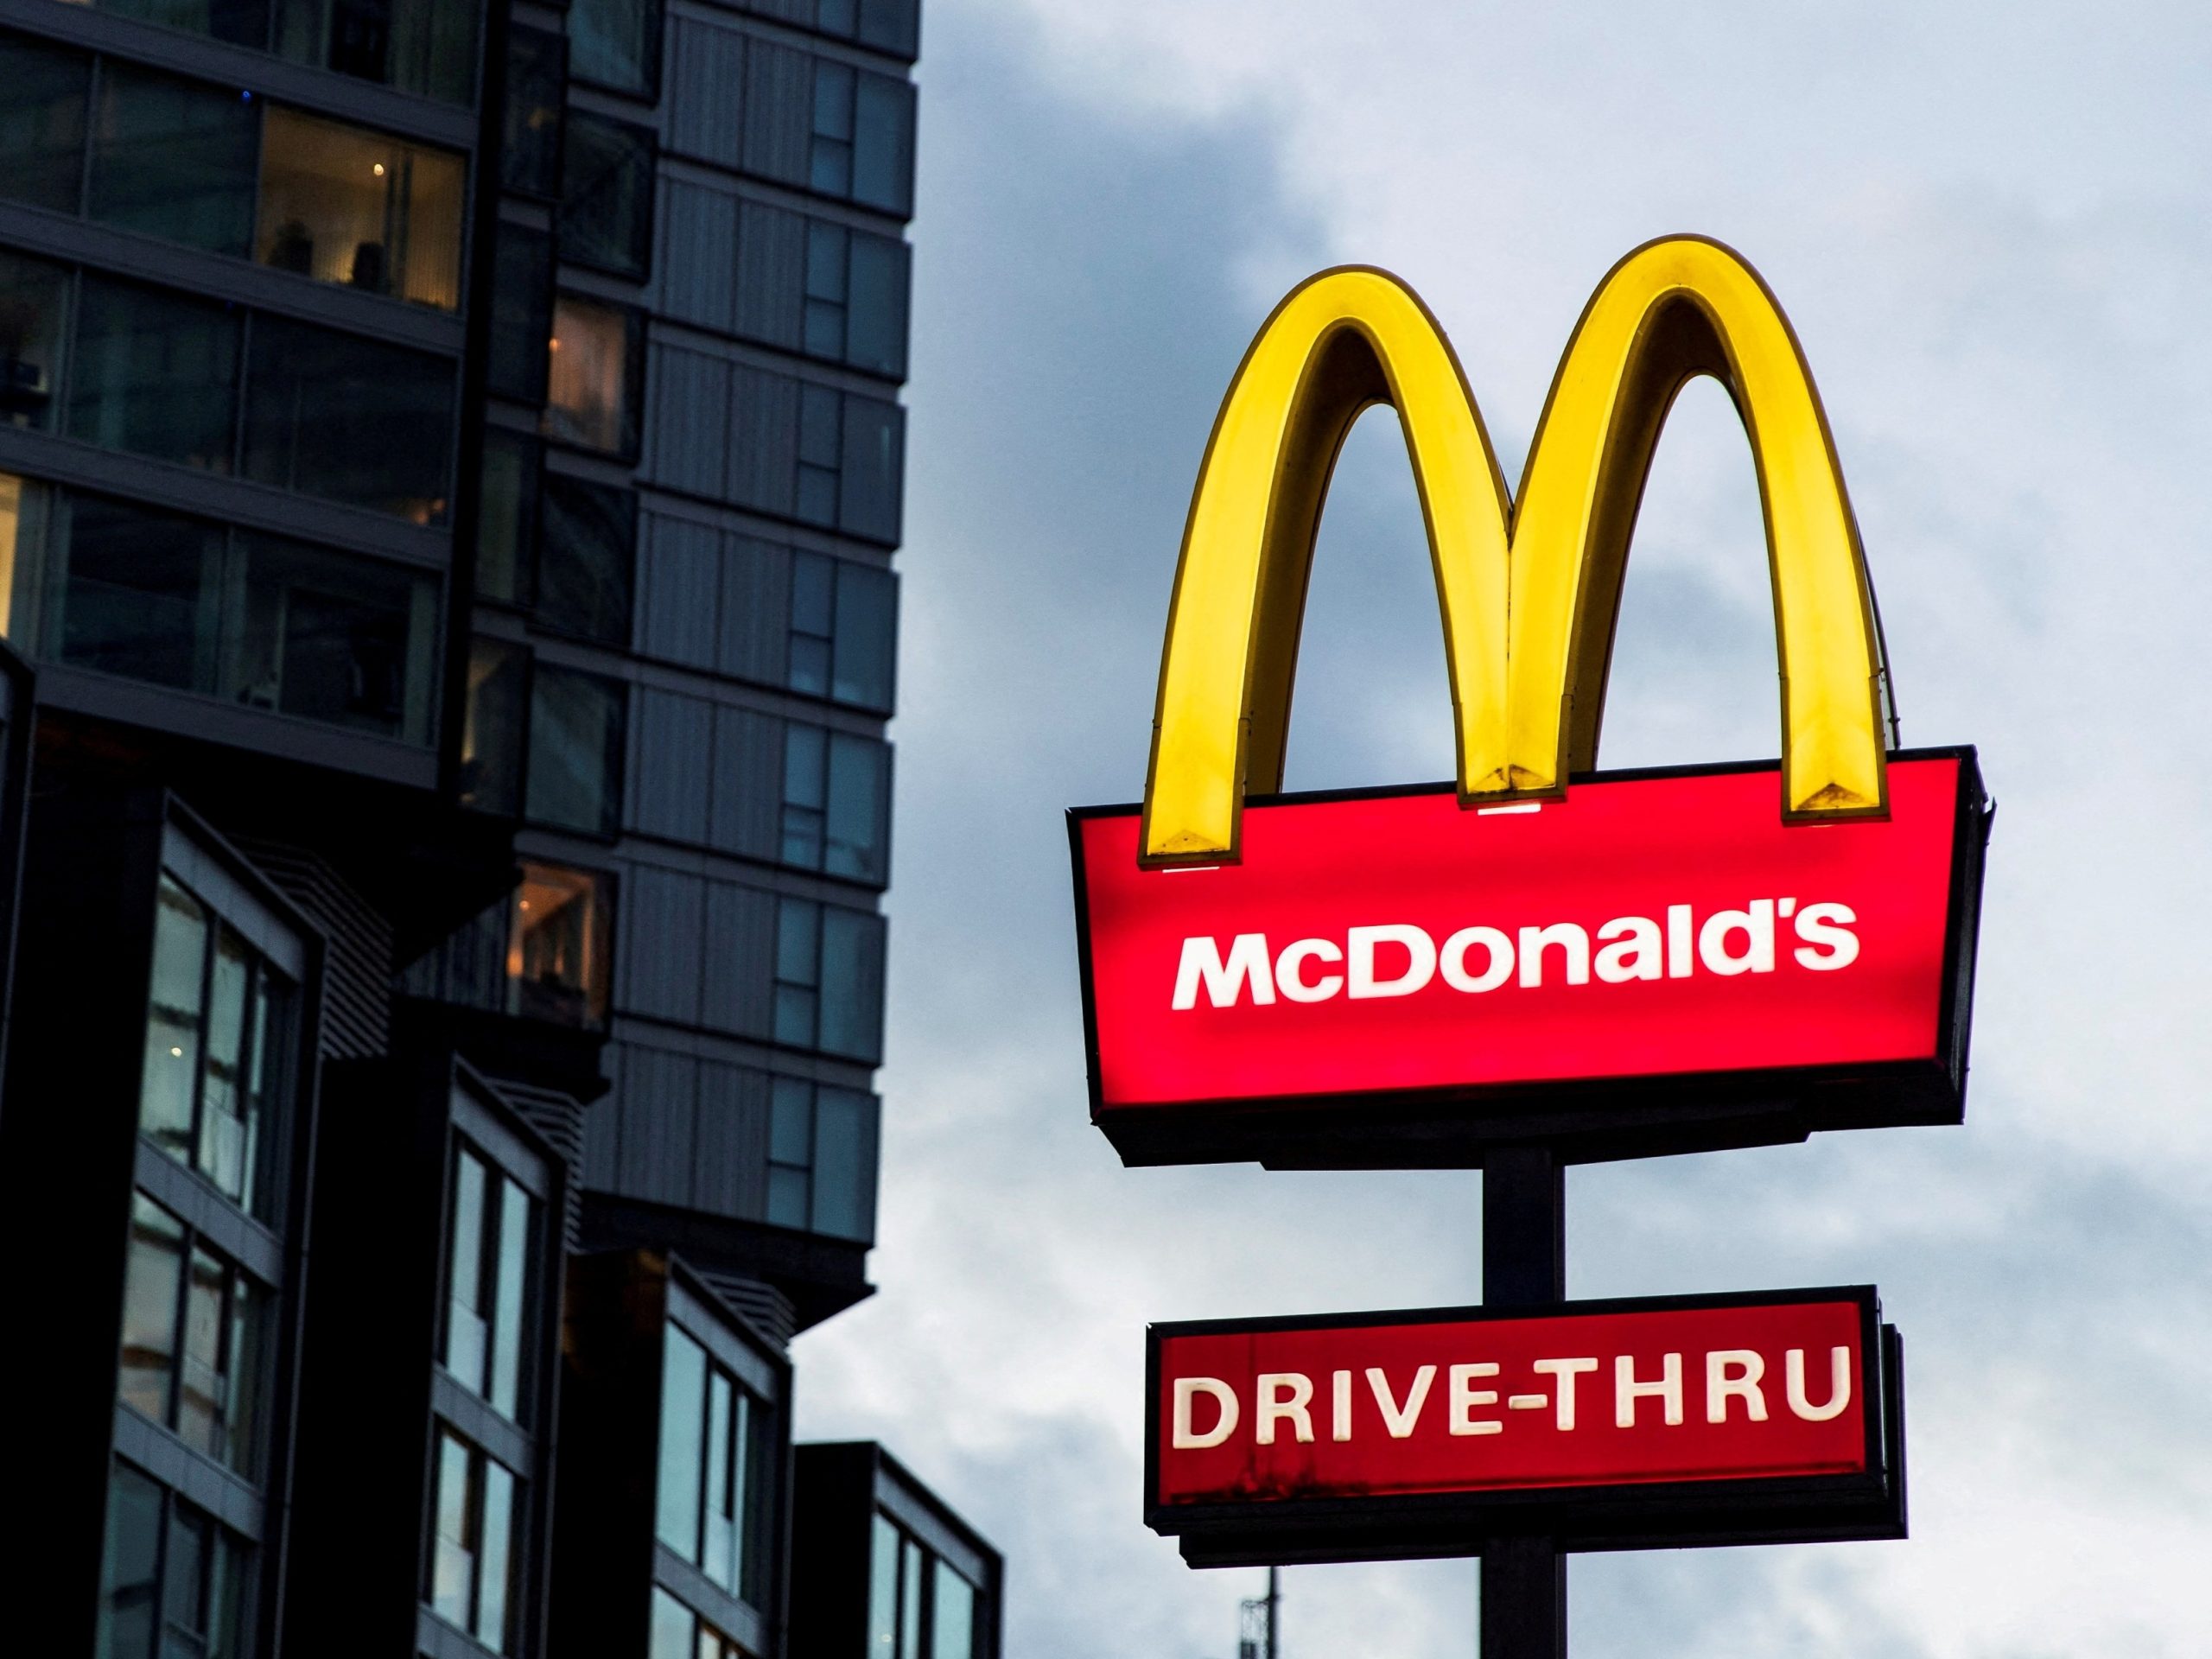 McDonald's Careers: The Golden Arches' Path to Professional Growth